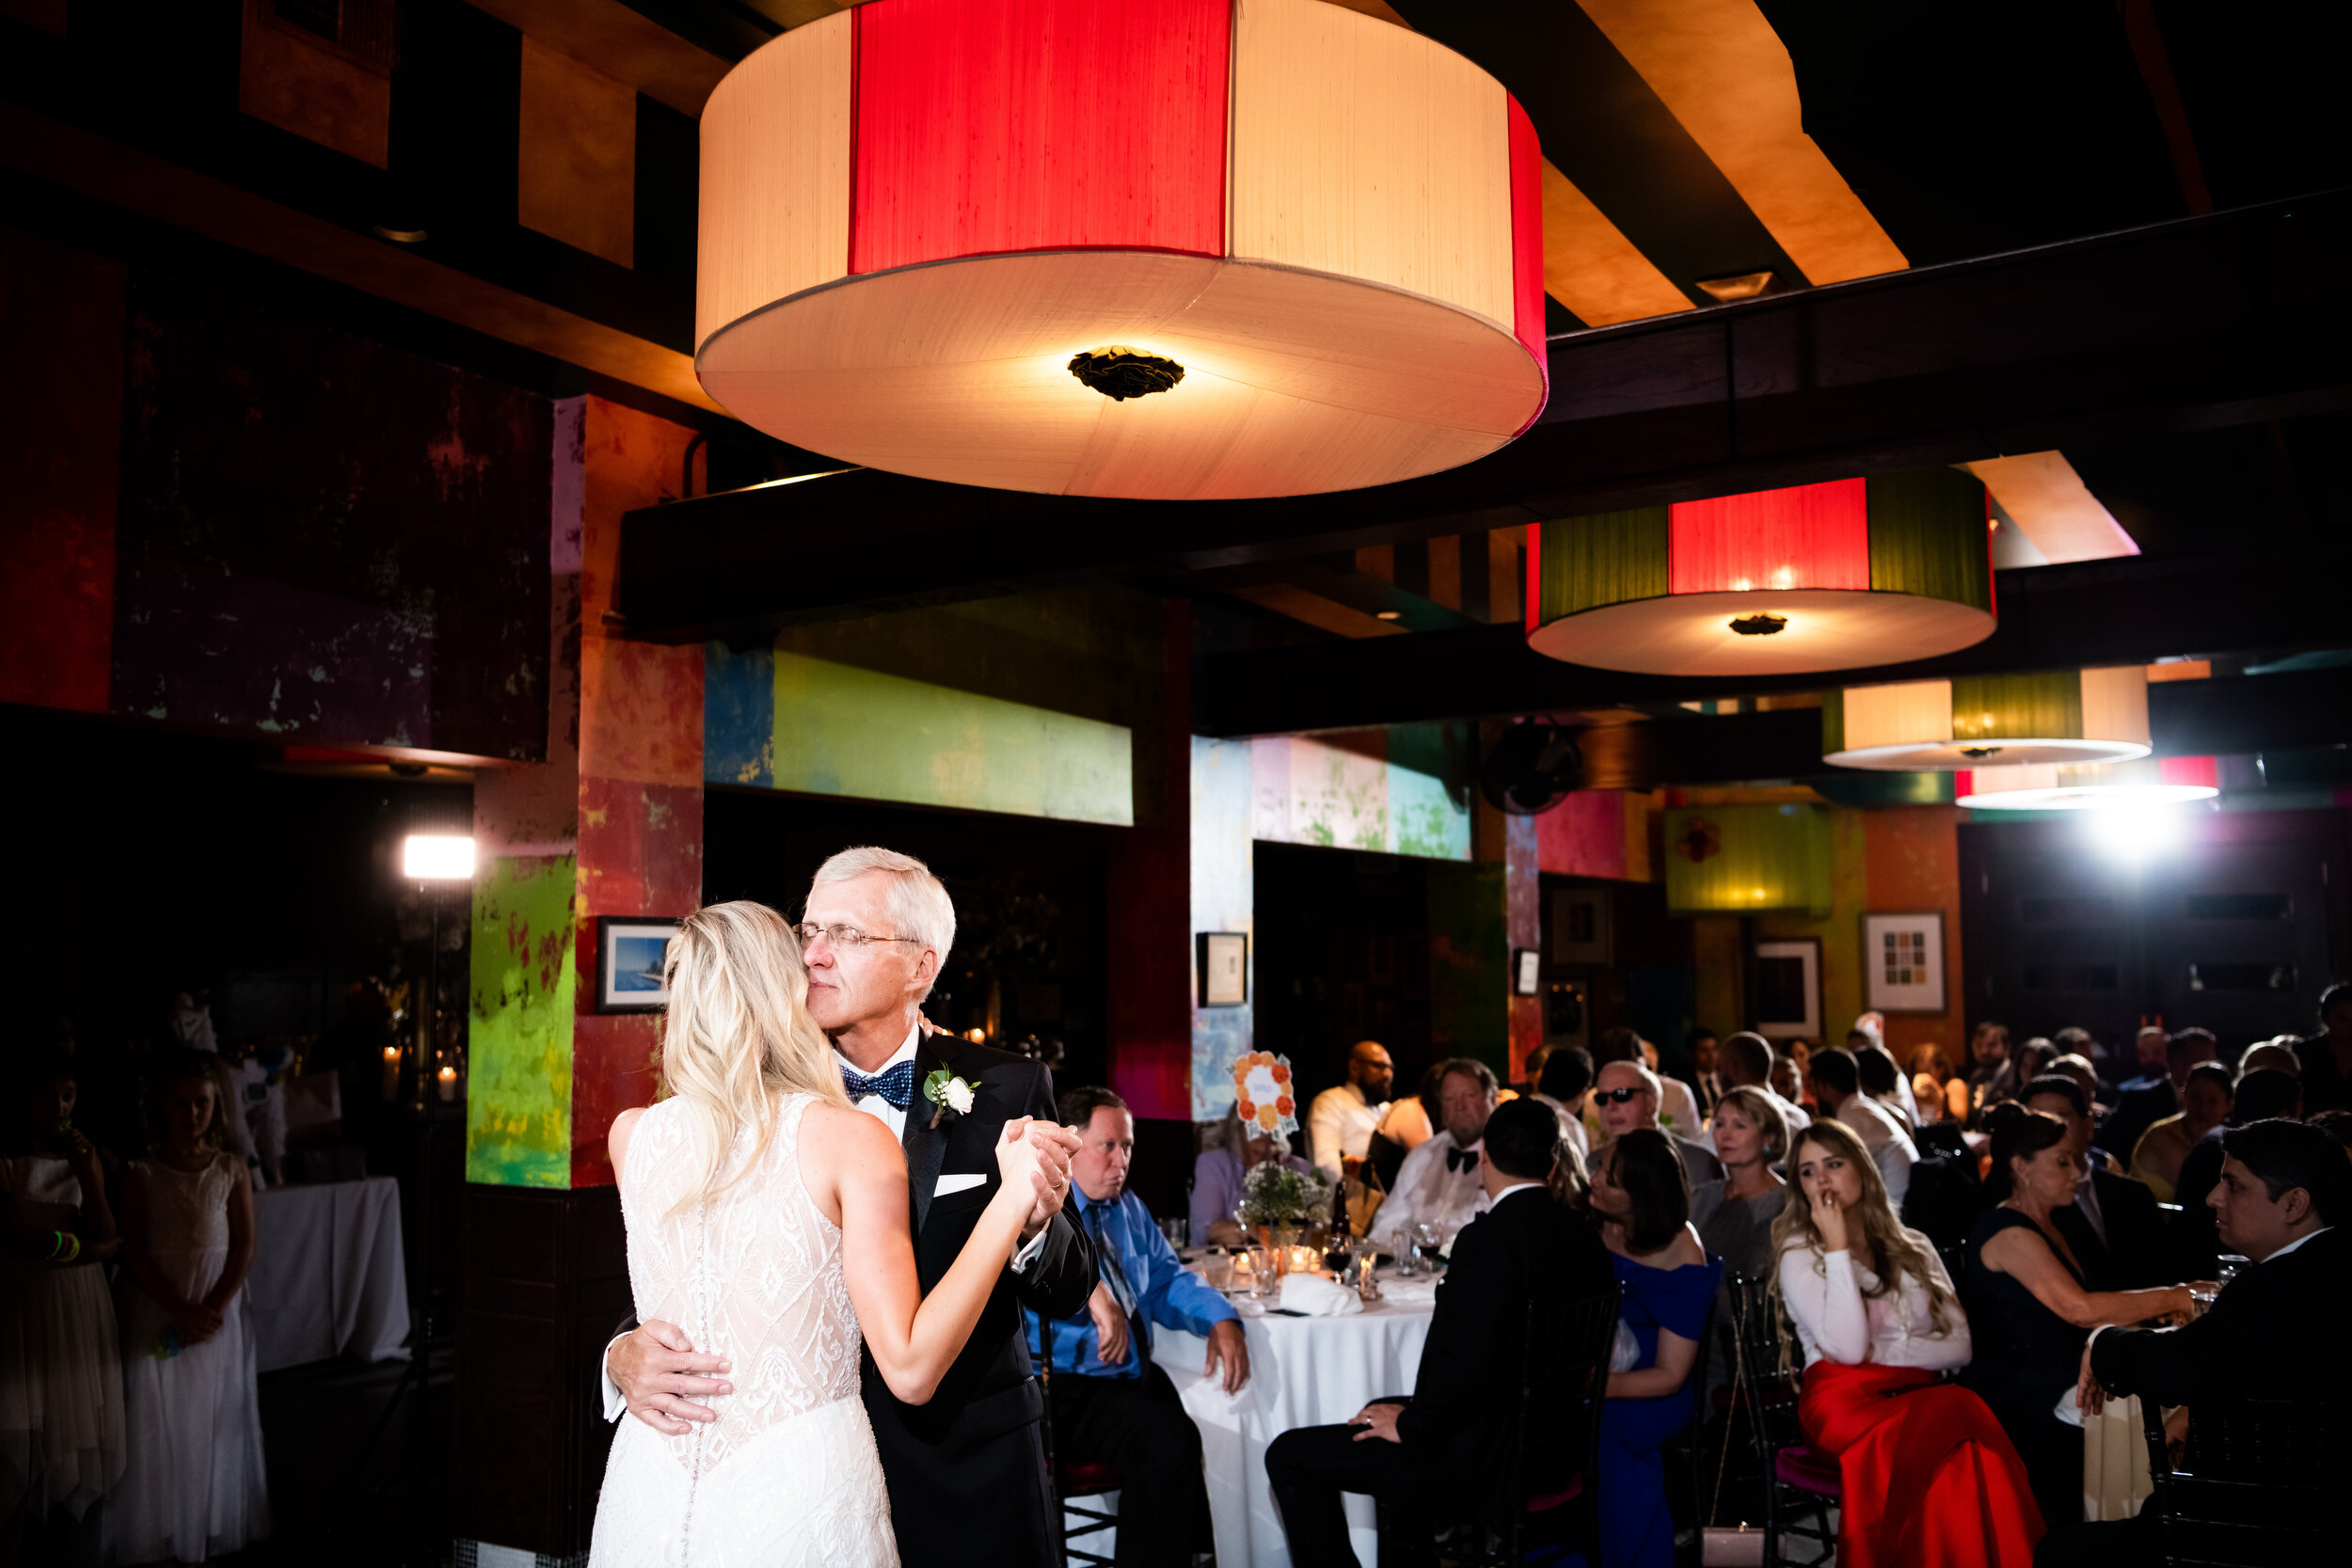 Wedding dancing: Carnivale Chicago Wedding captured by J. Brown Photography